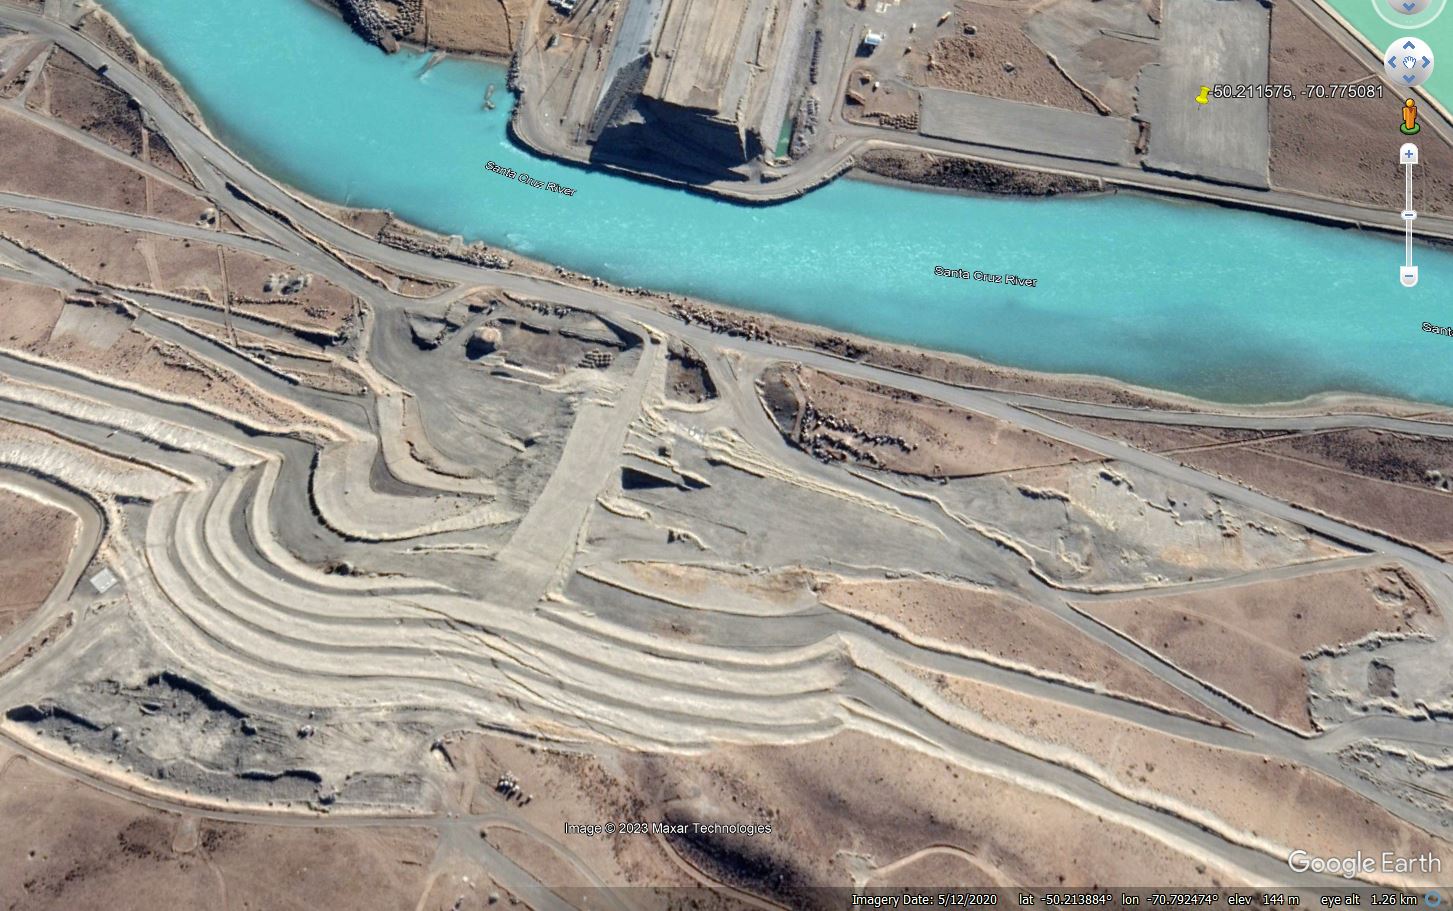 Google Earth image of the groundworks at the Condor Dam in Argentina in May 2020.